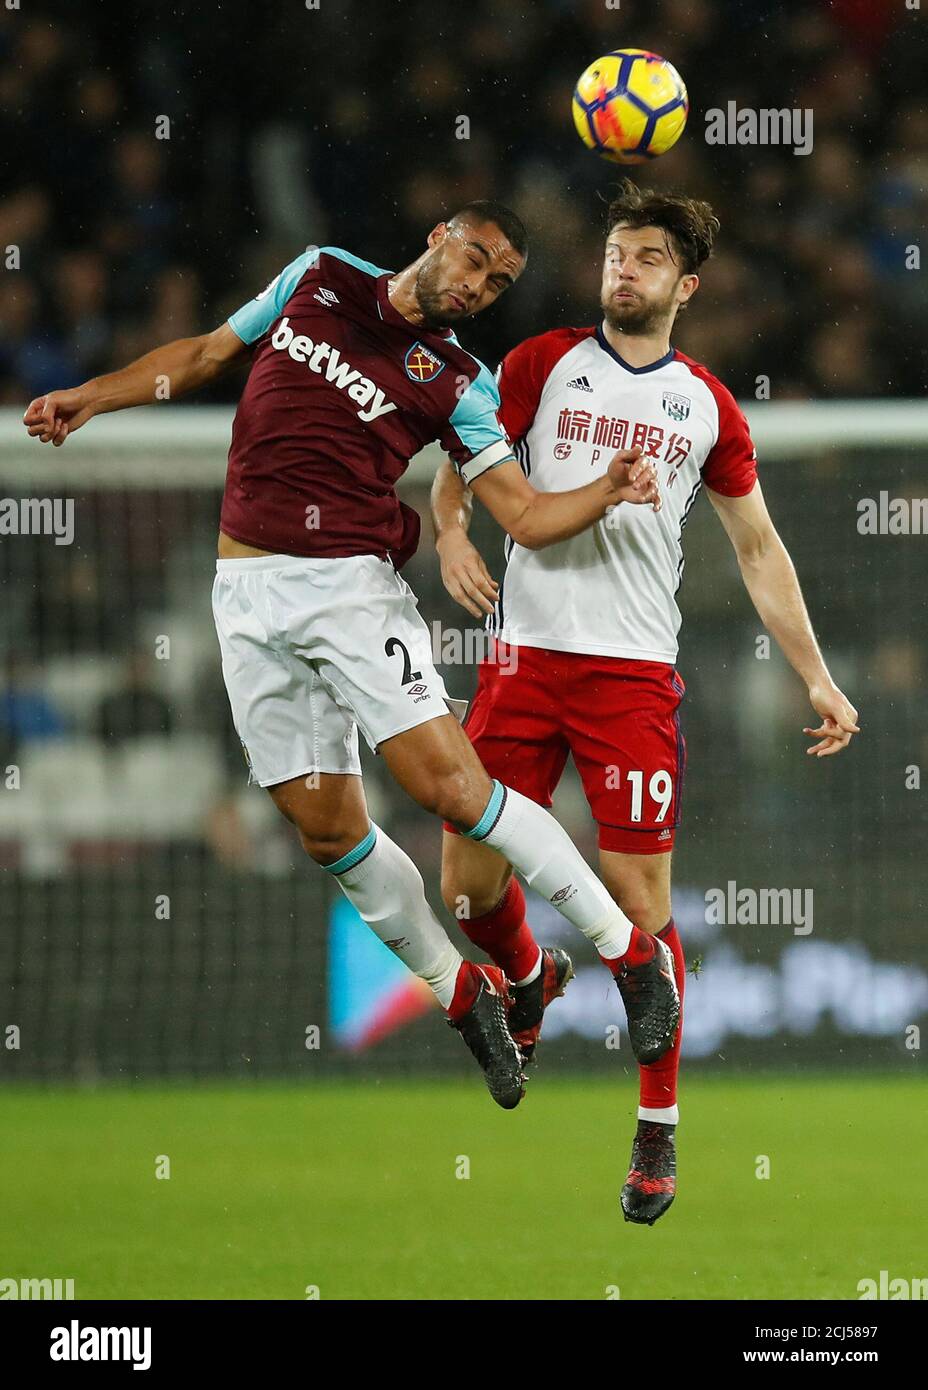 Soccer Football - Premier League - West Ham United vs West Bromwich Albion - London Stadium, London, Britain - January 2, 2018   West Ham United's Winston Reid in action with West Bromwich Albion's Jay Rodriguez   REUTERS/Eddie Keogh    EDITORIAL USE ONLY. No use with unauthorized audio, video, data, fixture lists, club/league logos or "live" services. Online in-match use limited to 75 images, no video emulation. No use in betting, games or single club/league/player publications.  Please contact your account representative for further details. Stock Photo